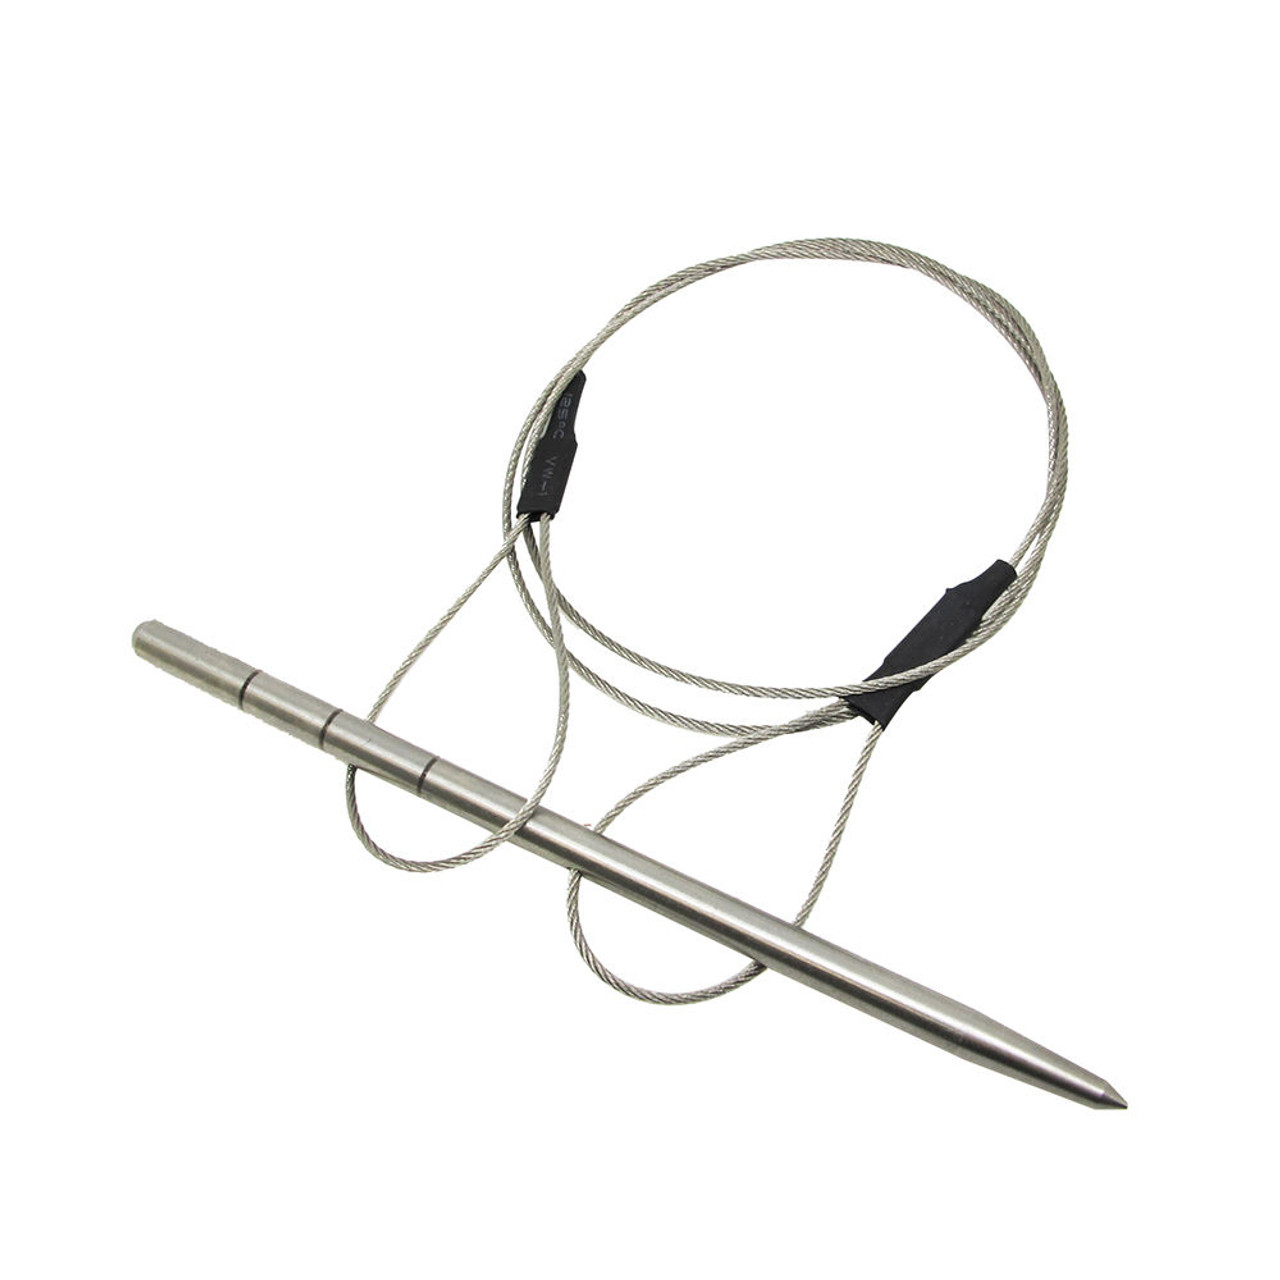 Spearfishing Compact Stainless Steel Fish Stringer Cable & 4.75 Rod